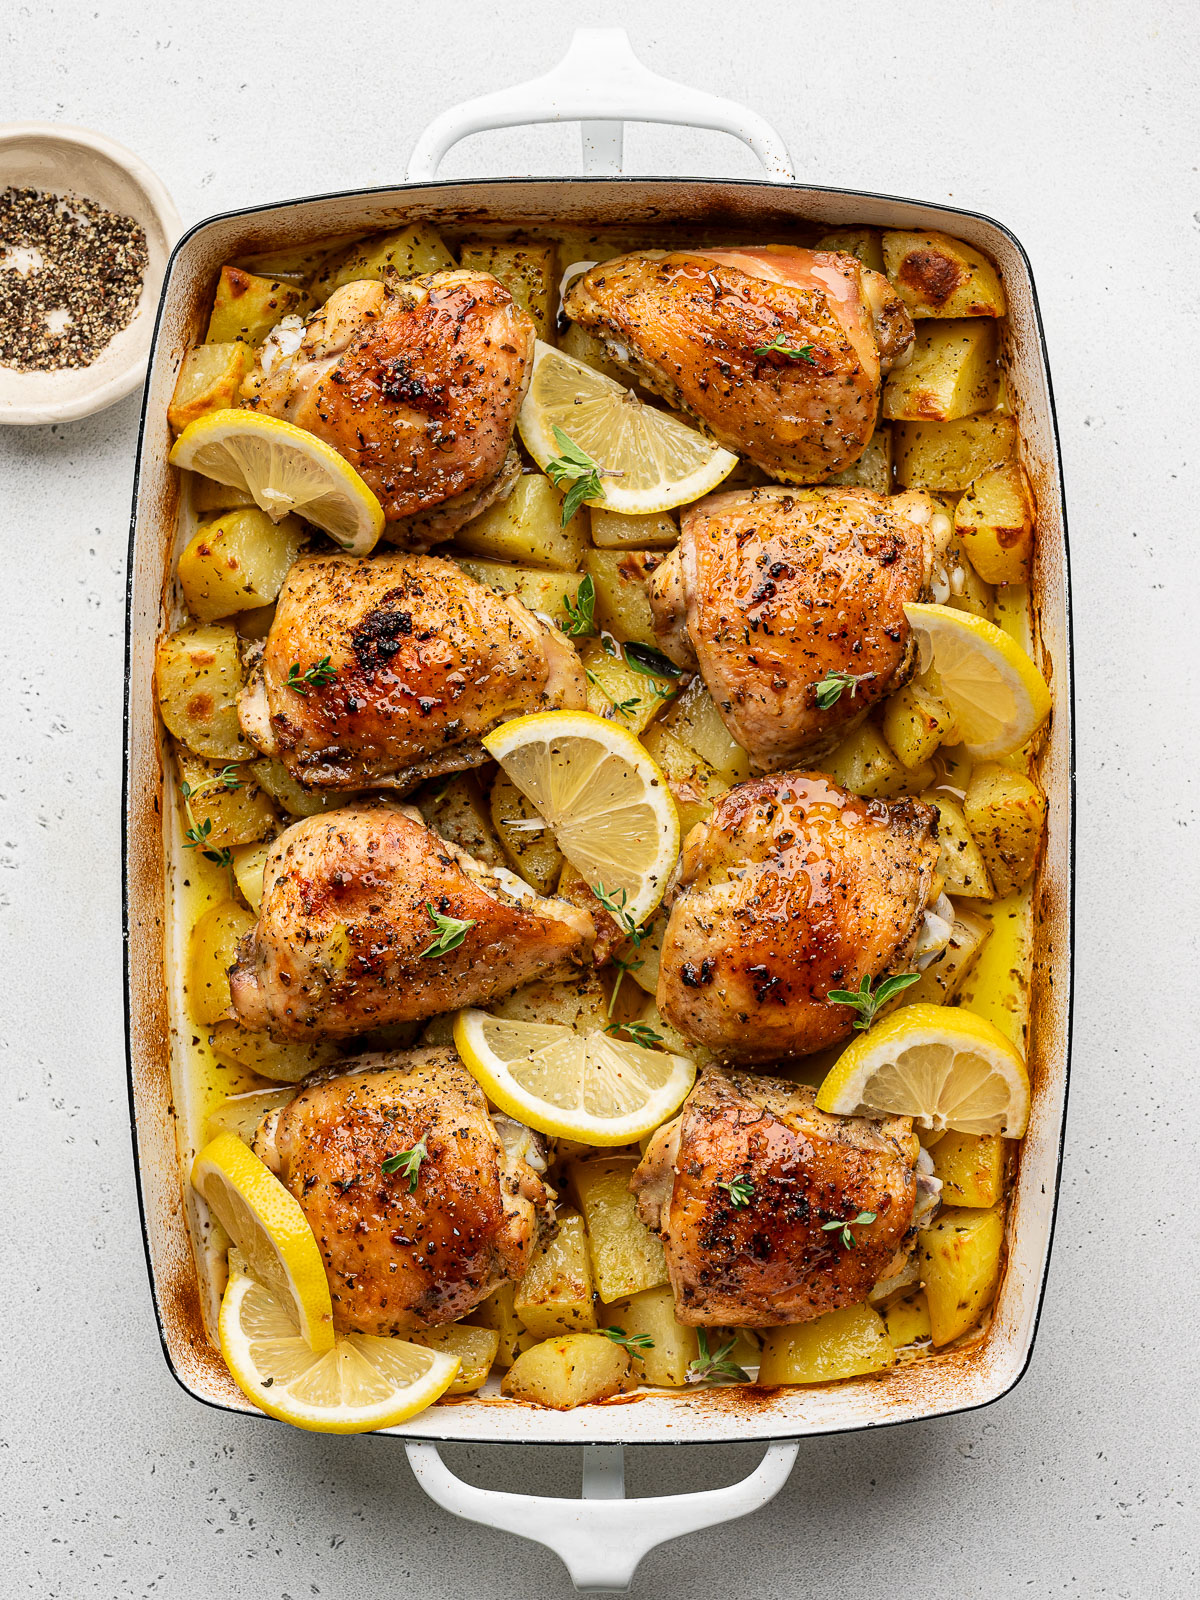 baked Greek chicken and potatoes in a white casserole dish garnished with lemon slices and fresh oregano.